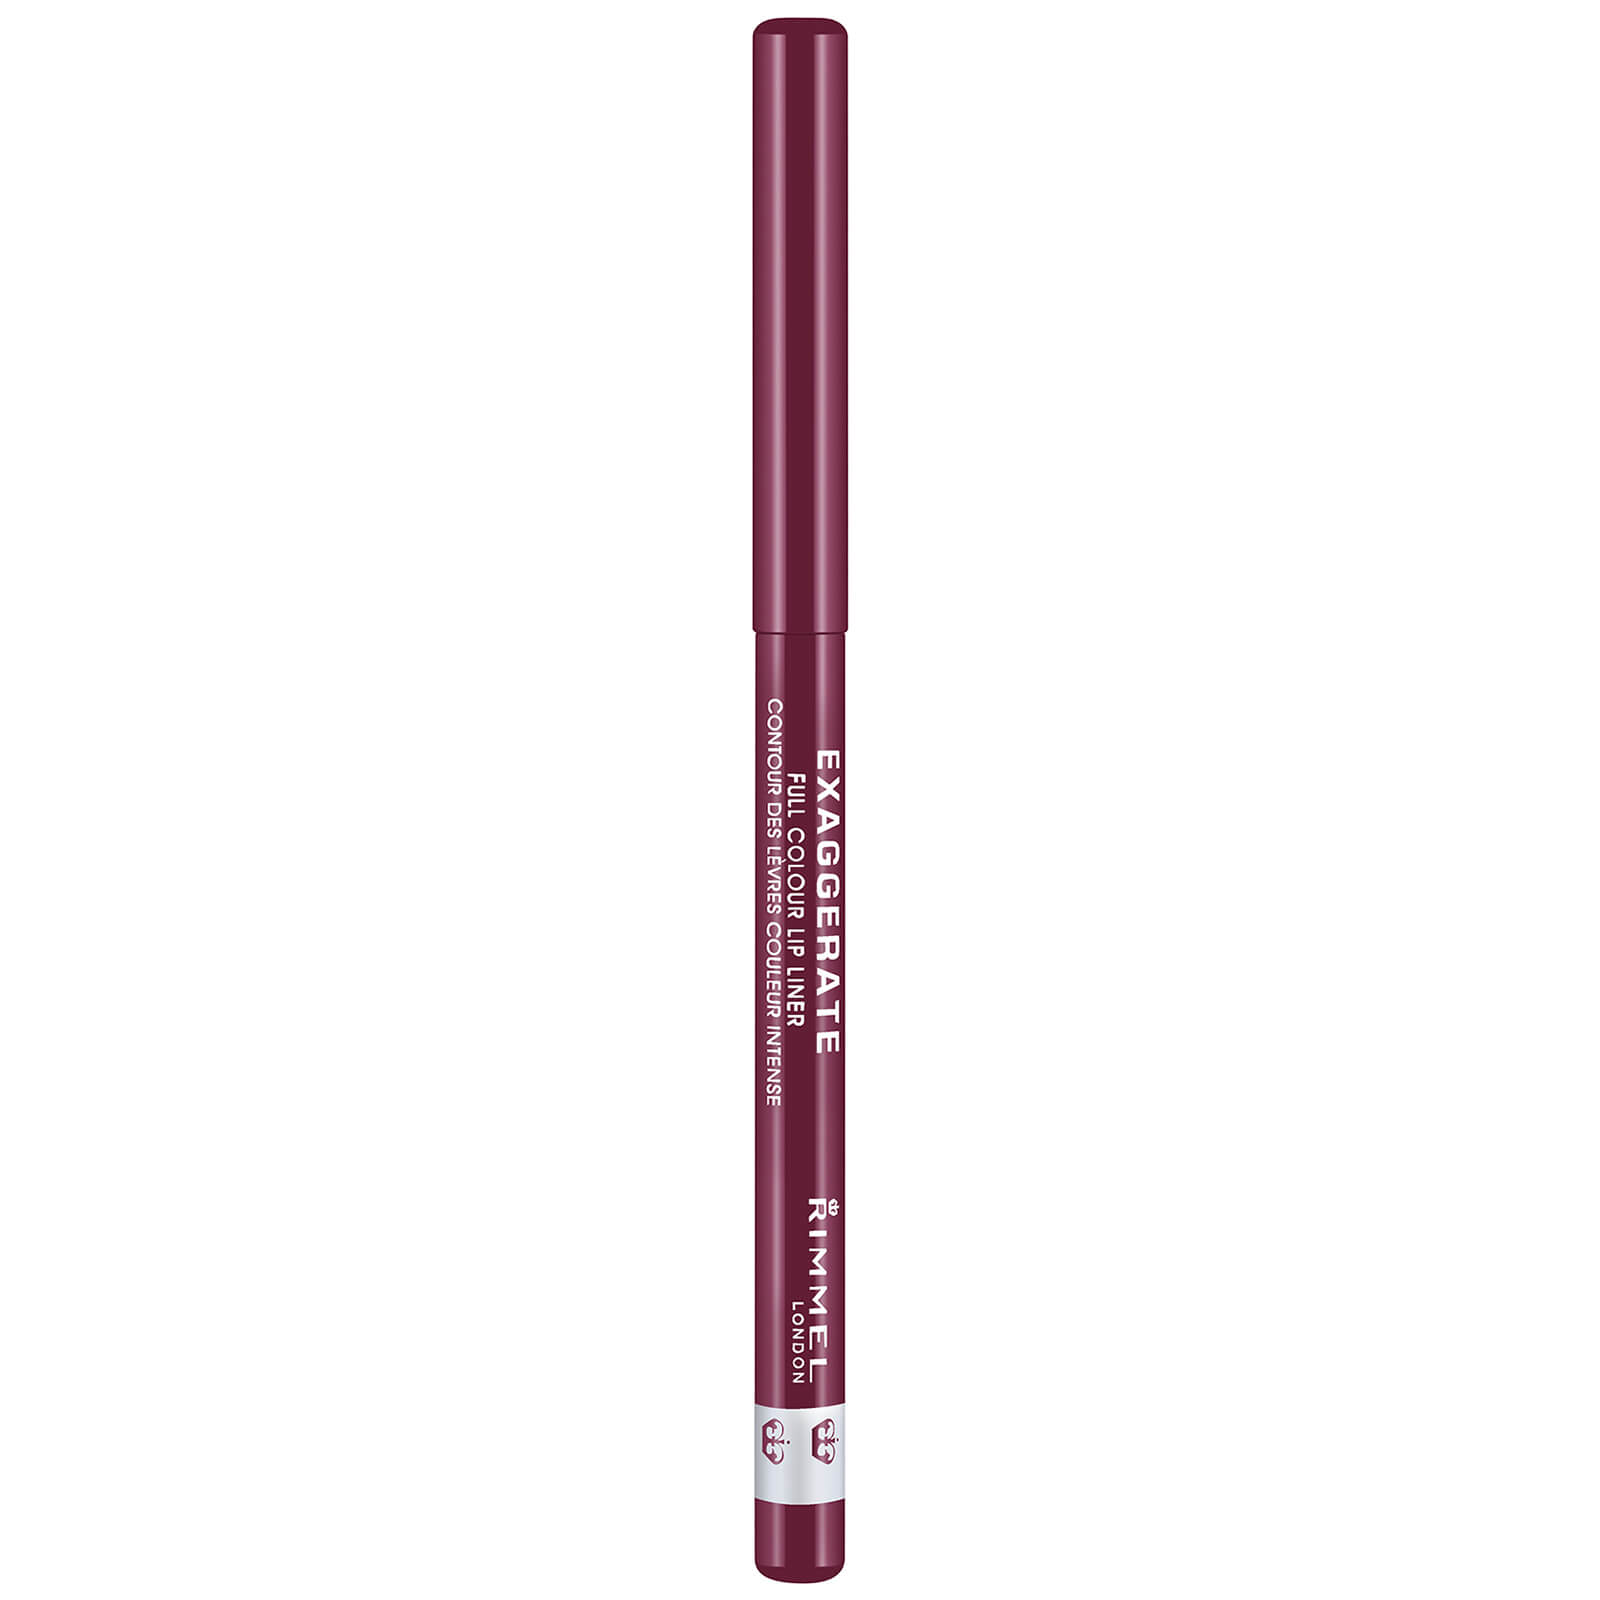 Image of Rimmel London Exaggerate Automatic Lip Liner – 105 – Under My Spell, 0.25g